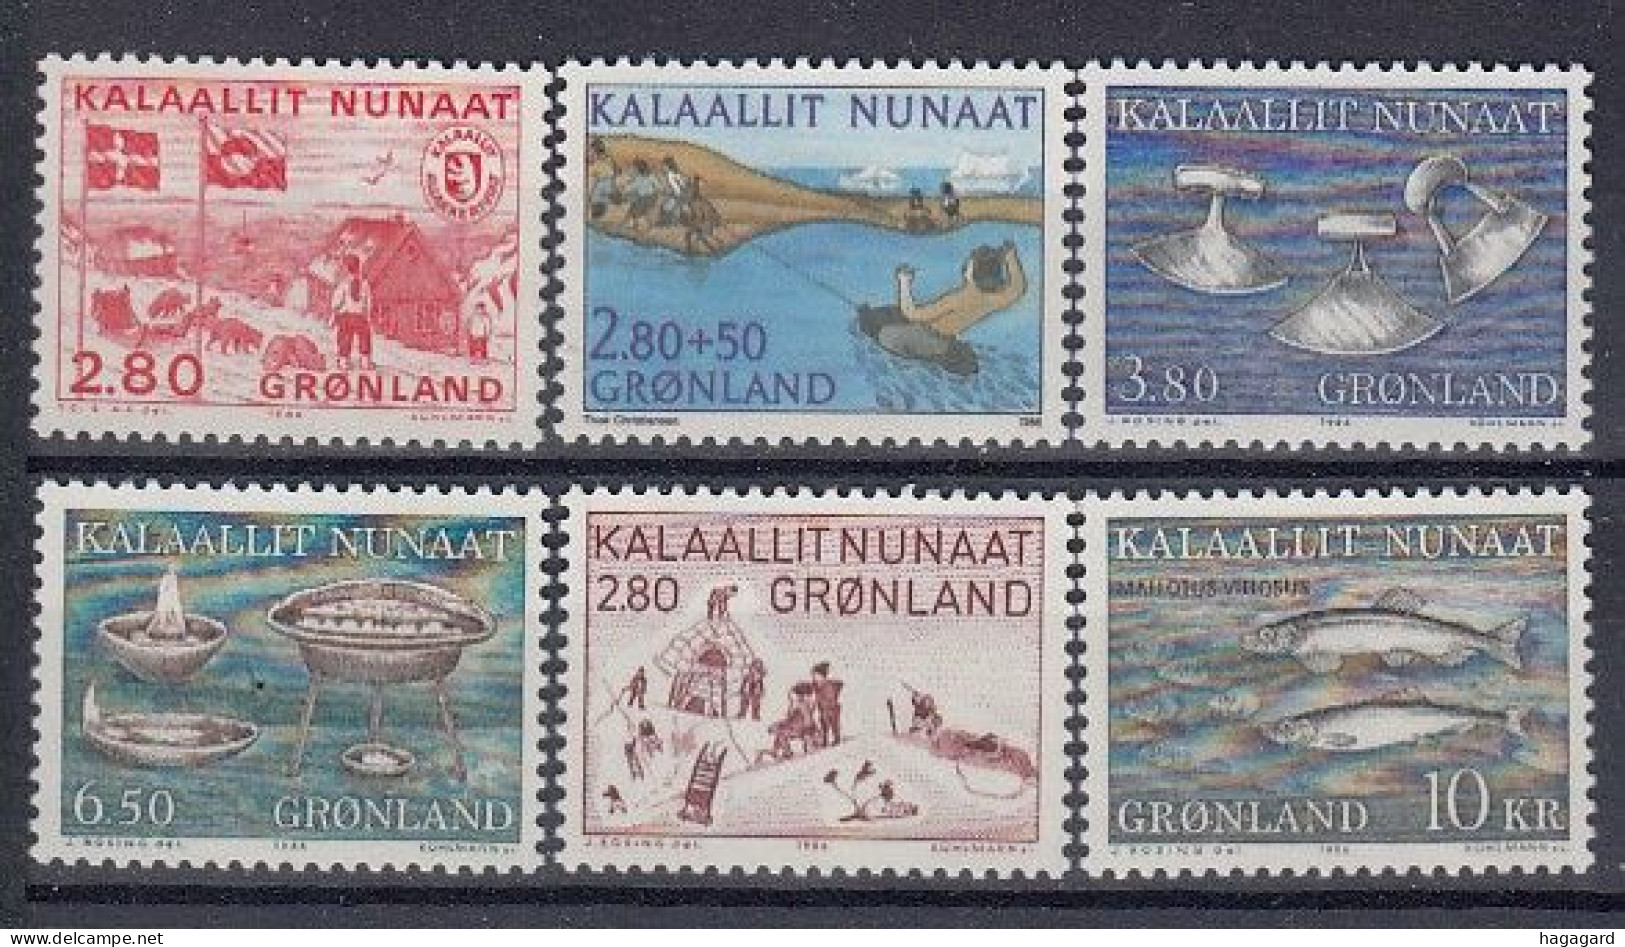 G2209. Greenland 1986. Complete Year Set. Michel 163-68. (10.20€). MNH(**) - Annate Complete